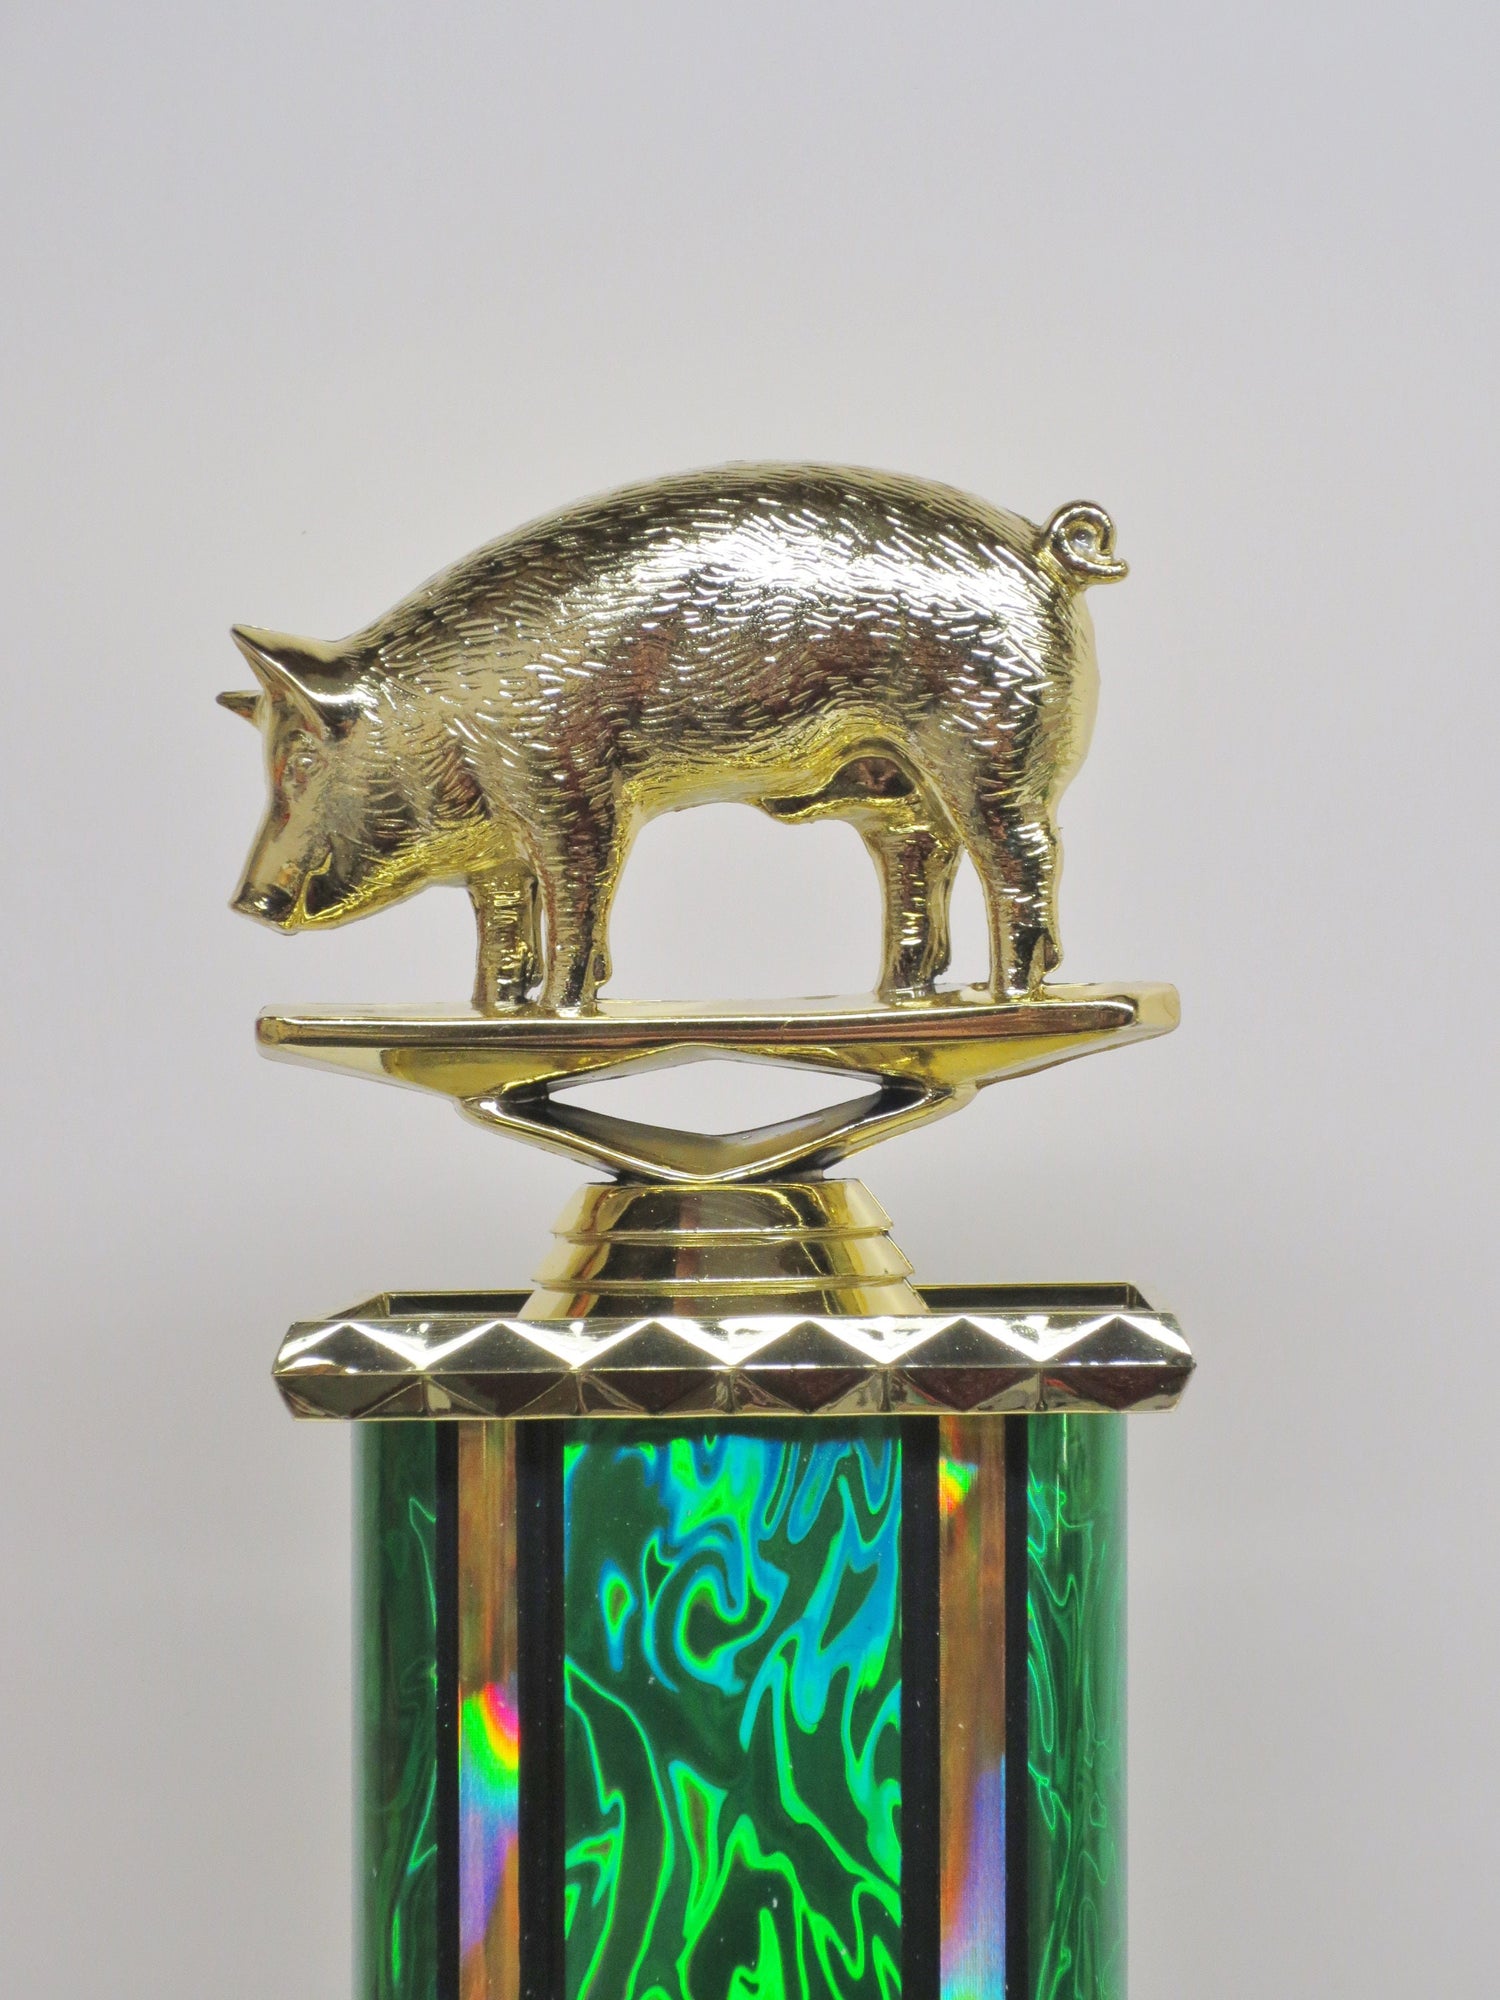 BBQ Trophy Best BBQ Ribs Cook Off Trophies Ribs Pork Pig Trophy Award Winner Champion Champ 4th of July Independence Day Labor Day Pigs